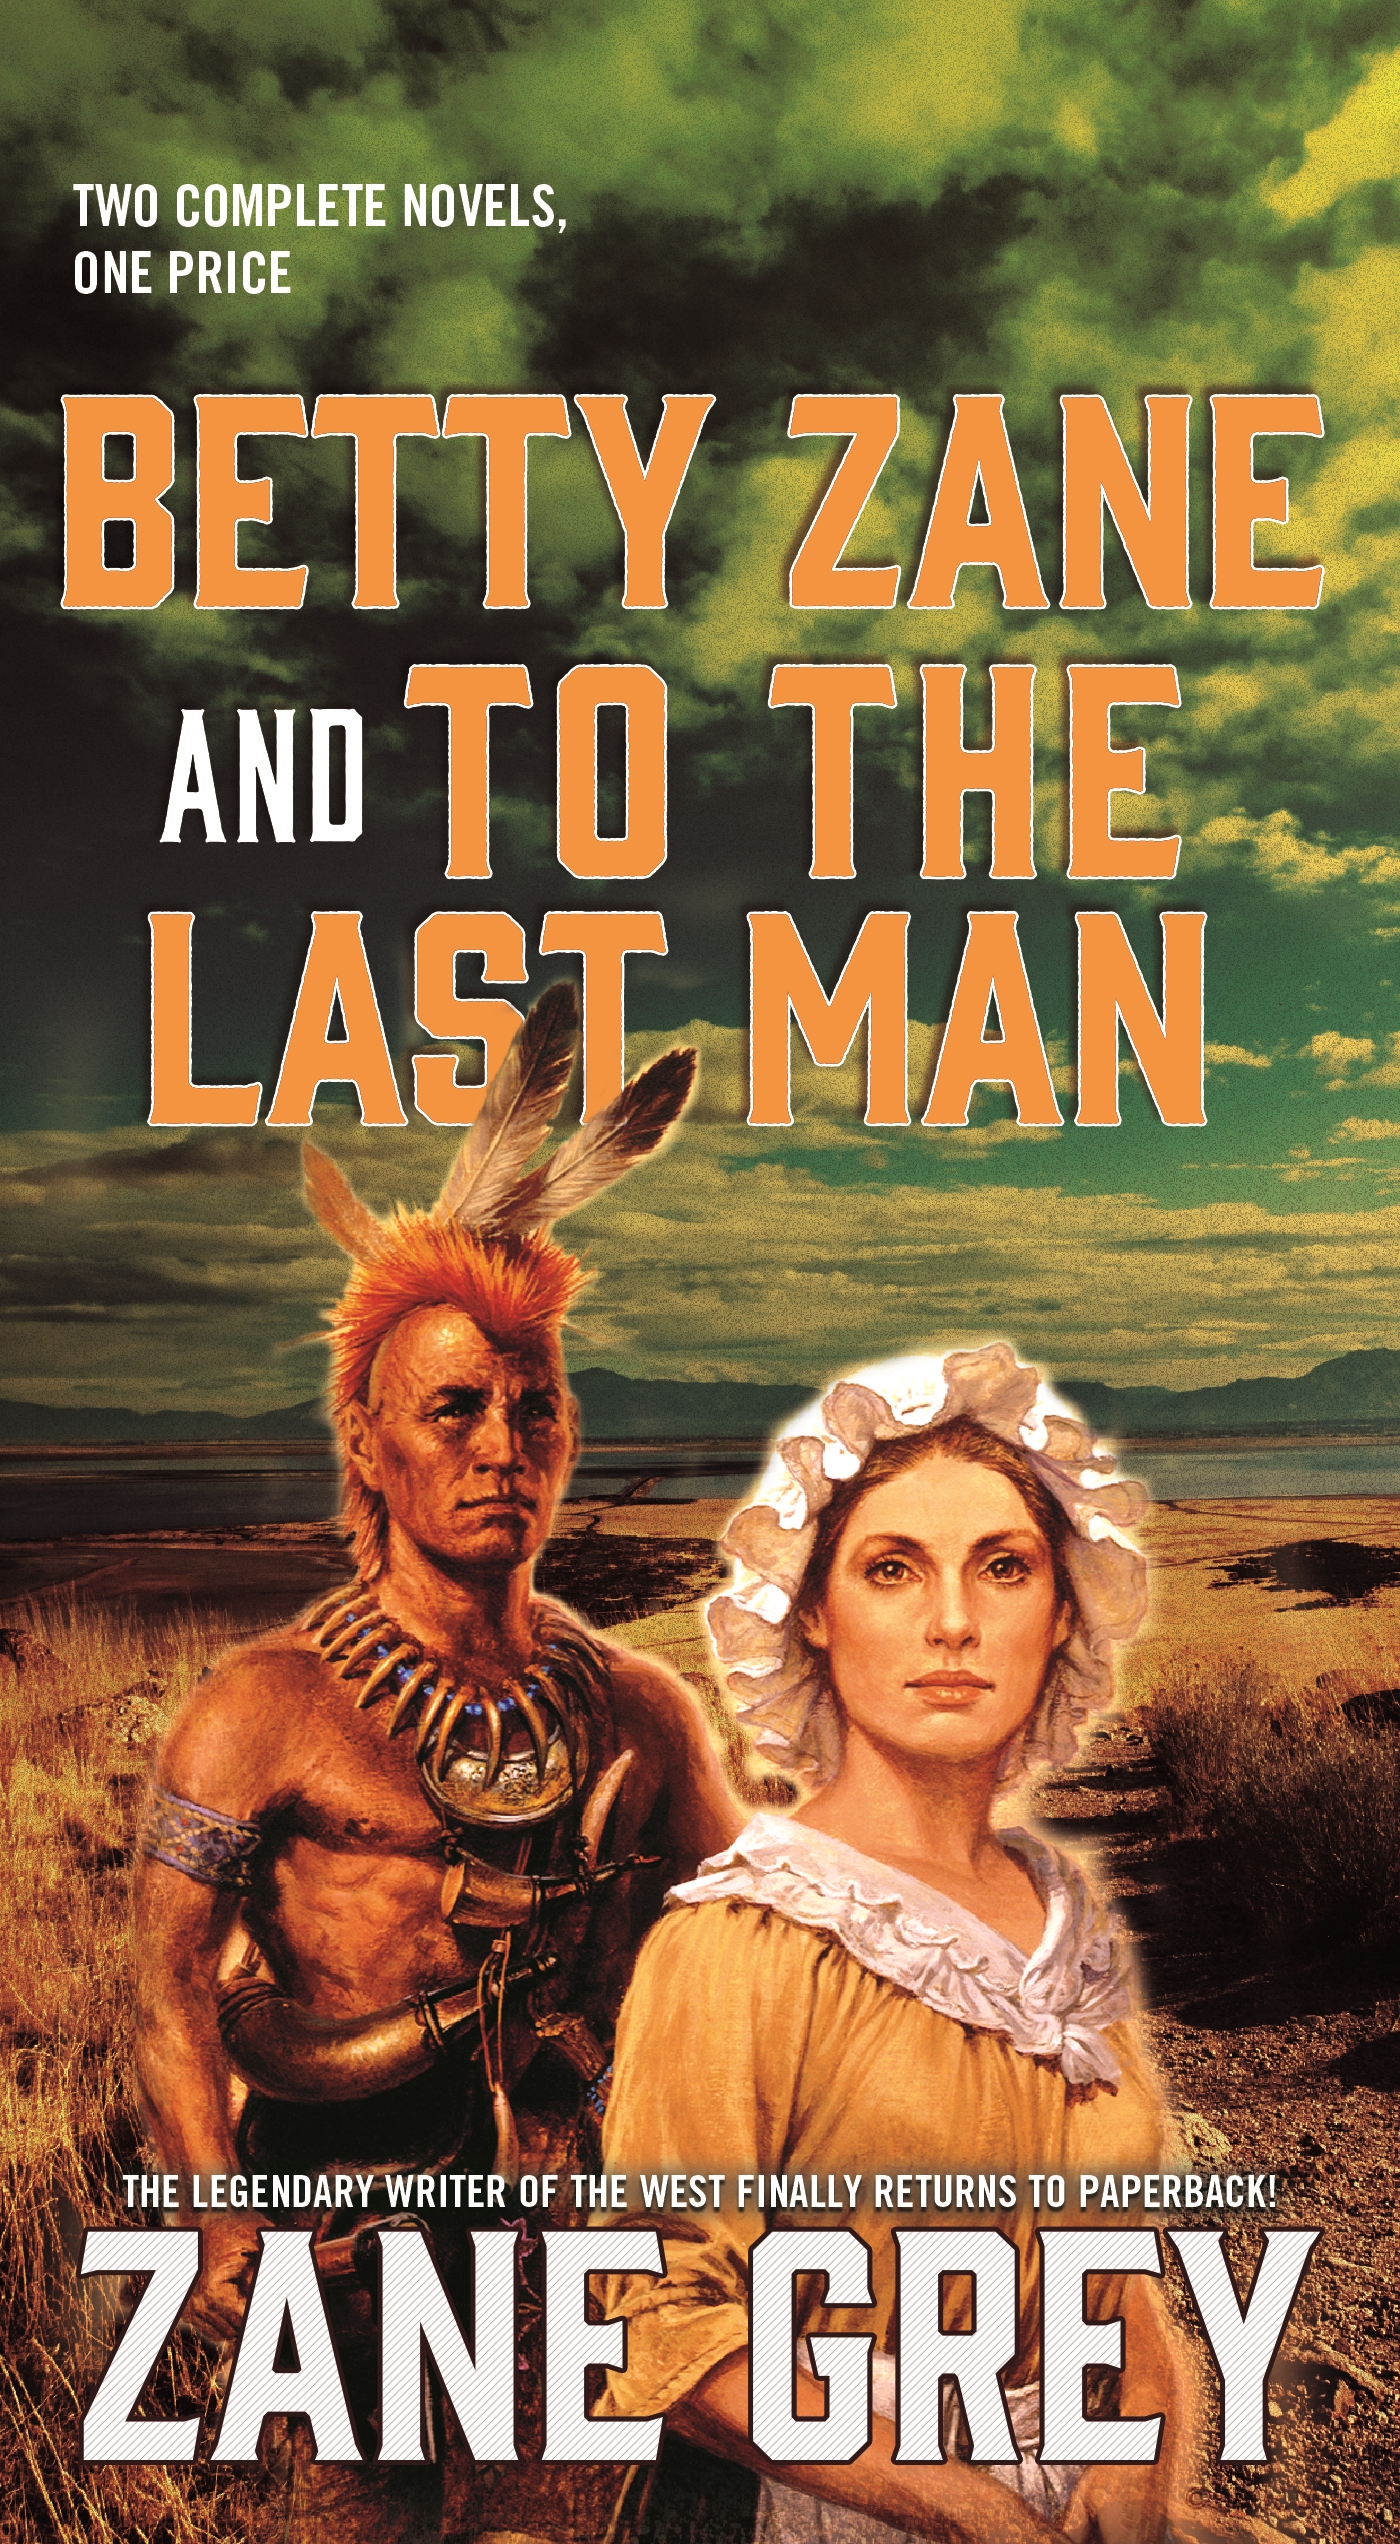 Betty Zane and To the Last Man : Two Great Novels by the Master of the Western by Zane Grey